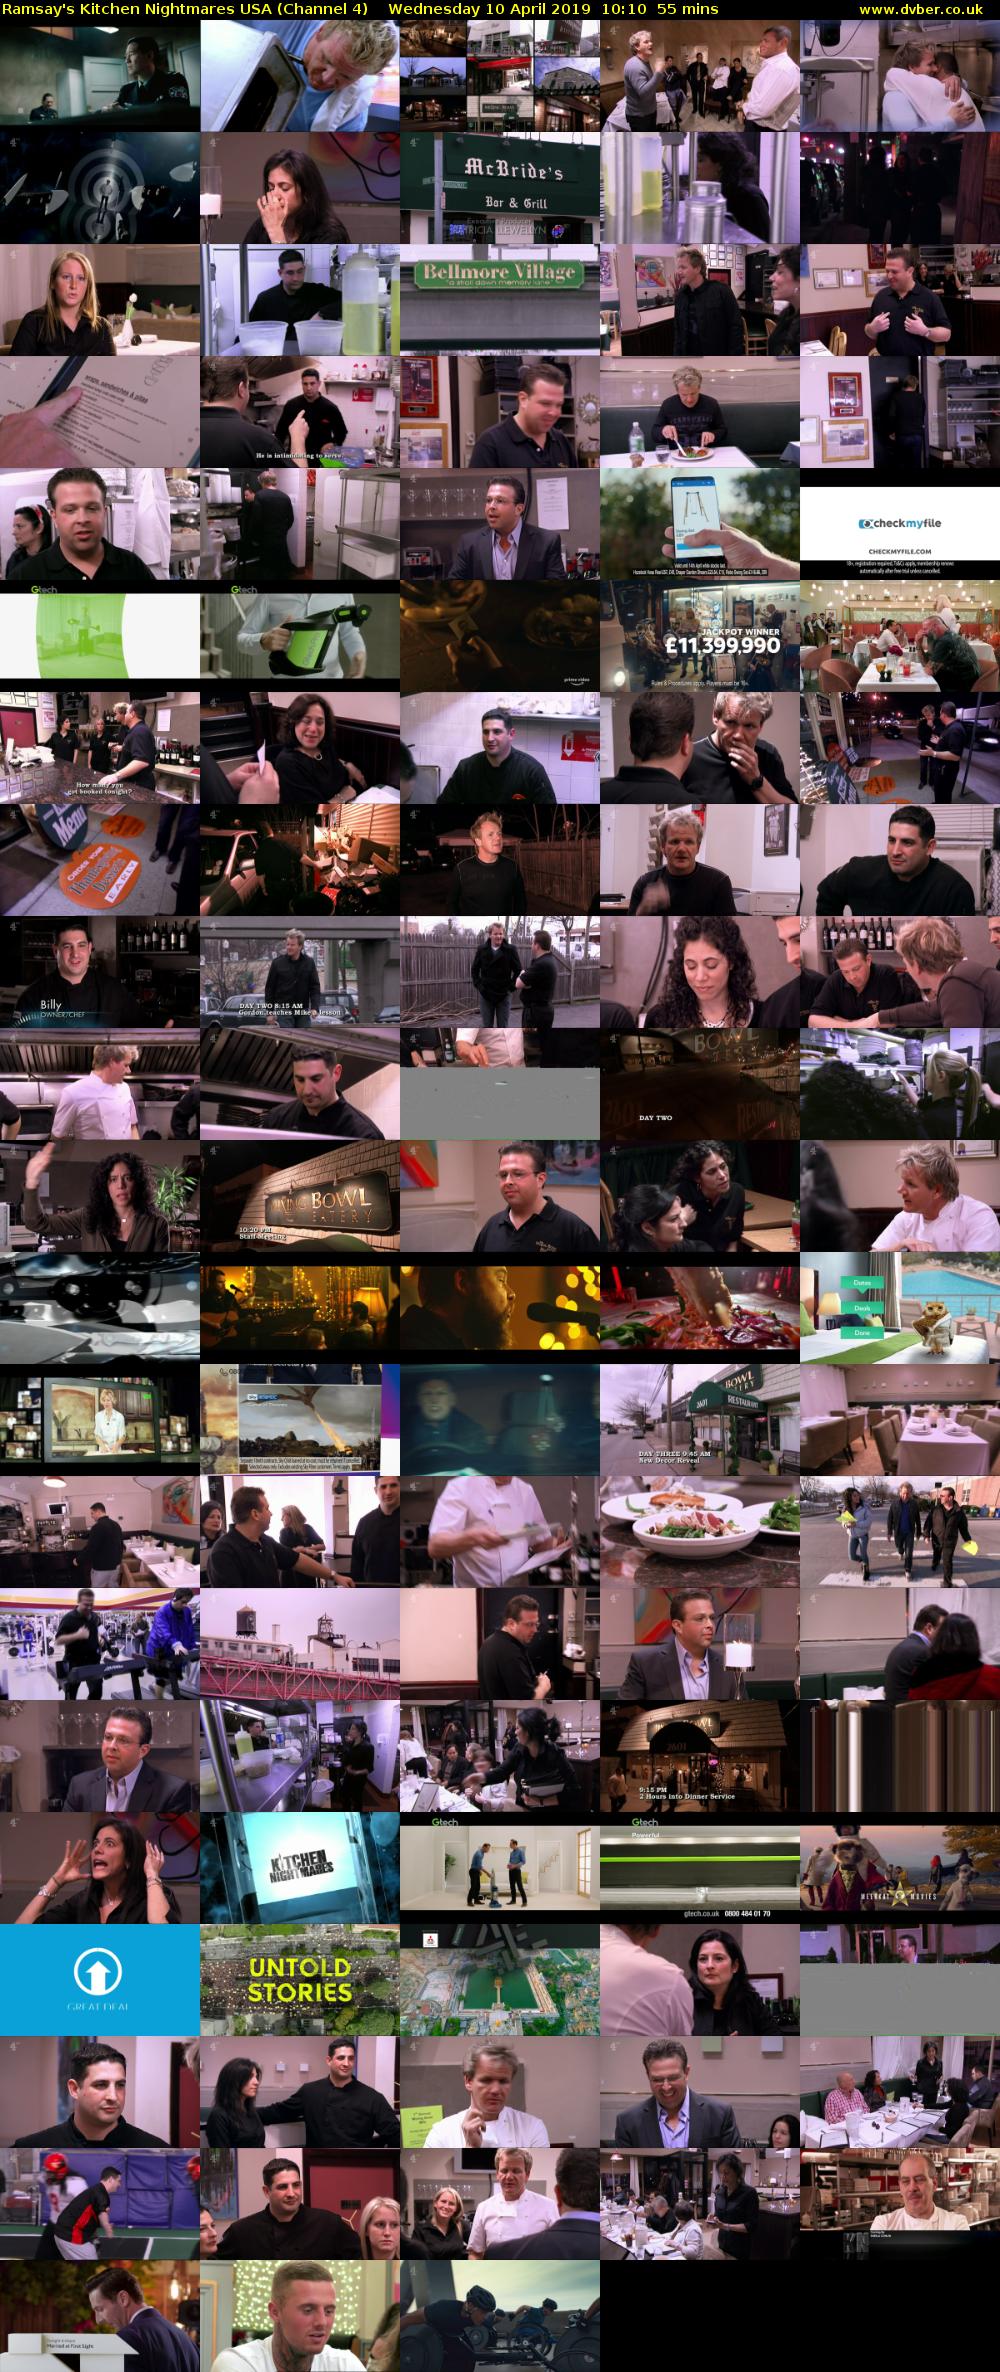 Ramsay's Kitchen Nightmares USA (Channel 4) Wednesday 10 April 2019 10:10 - 11:05